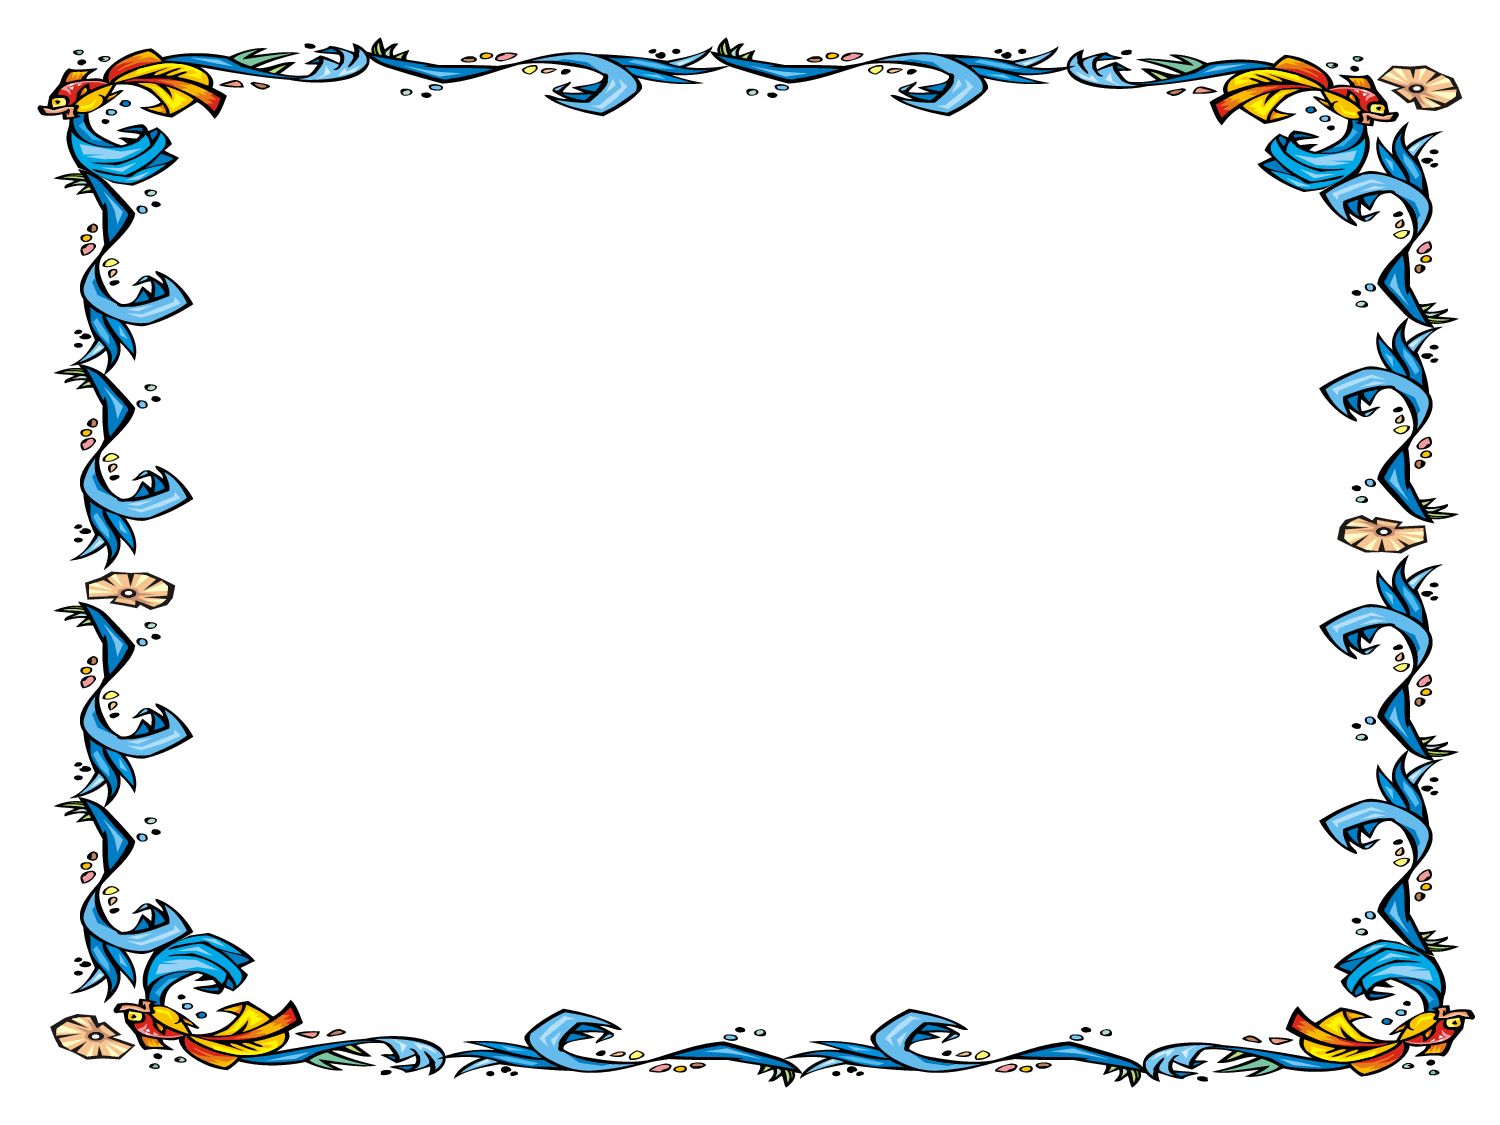 Free Certificate Borders For Word - ClipArt Best